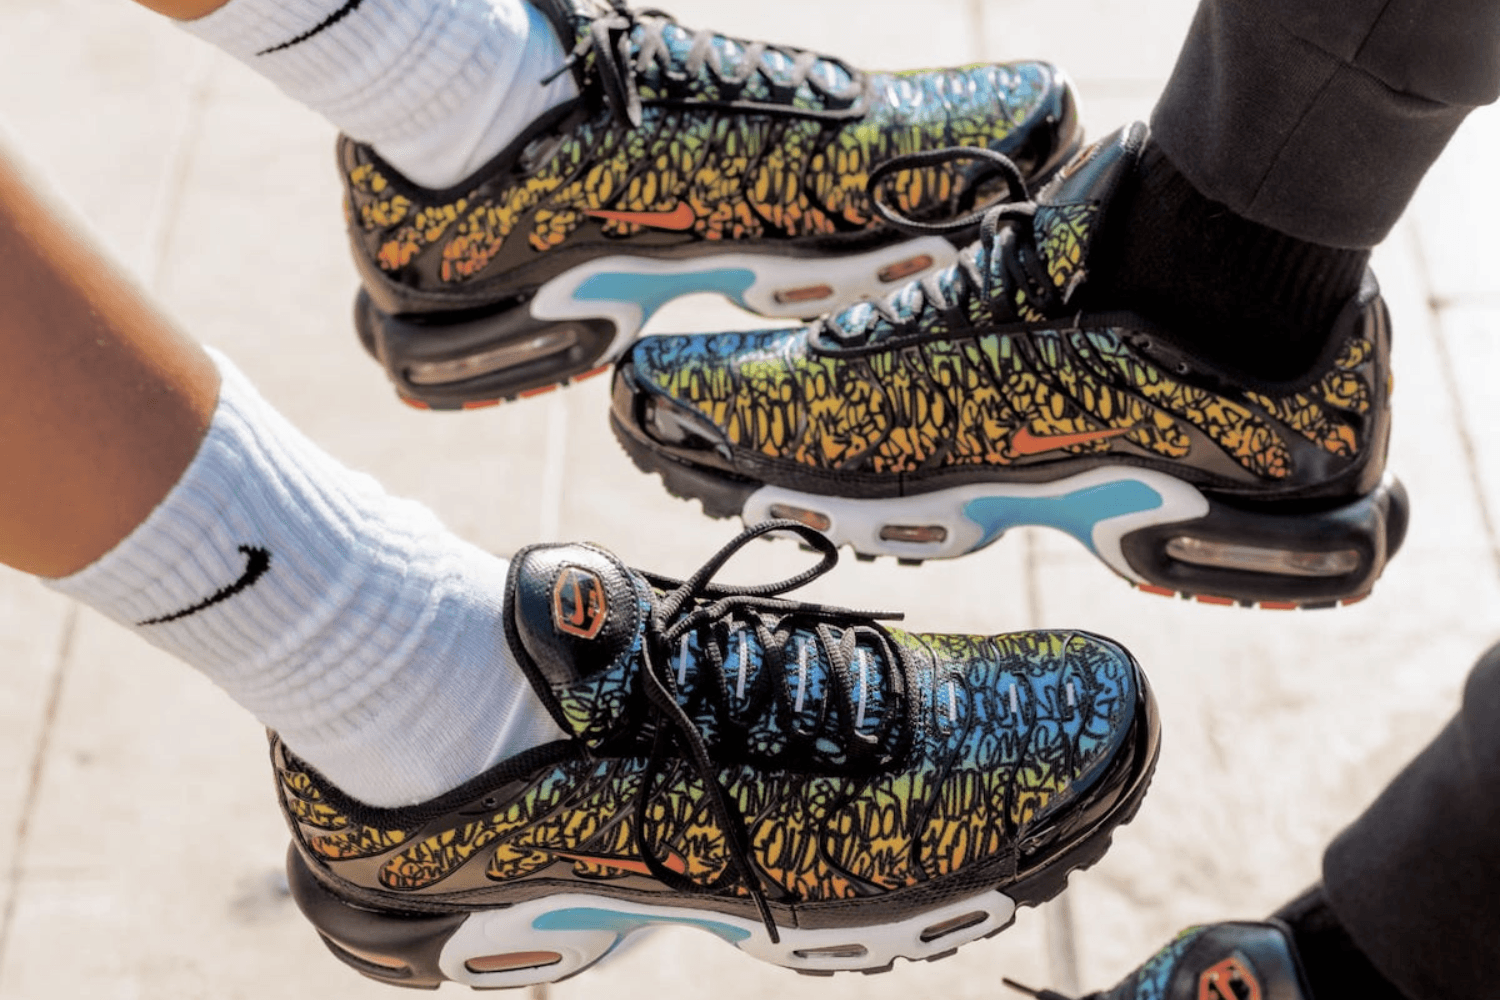 The Nike Air Max Plus 'Brixton' is covered in graffiti